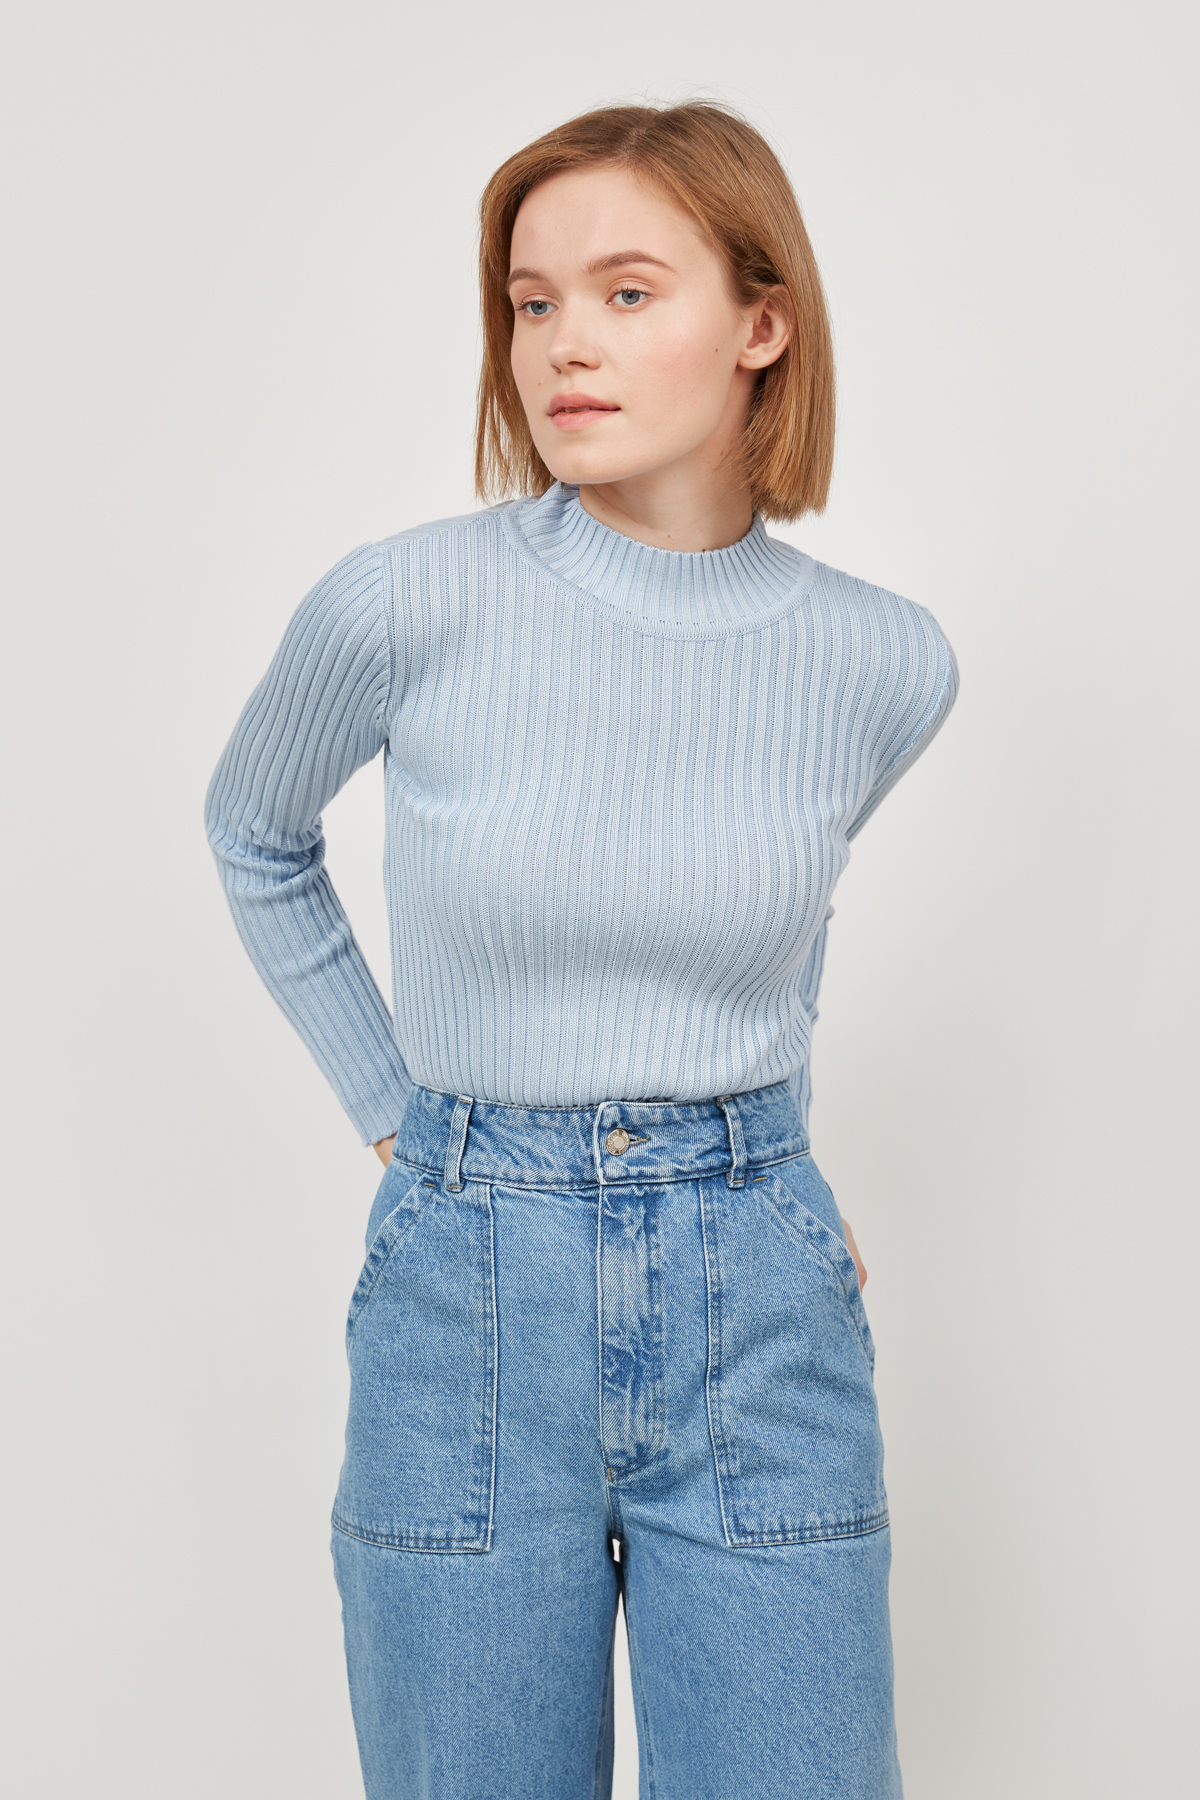 Knitted  blue sweater, photo 1